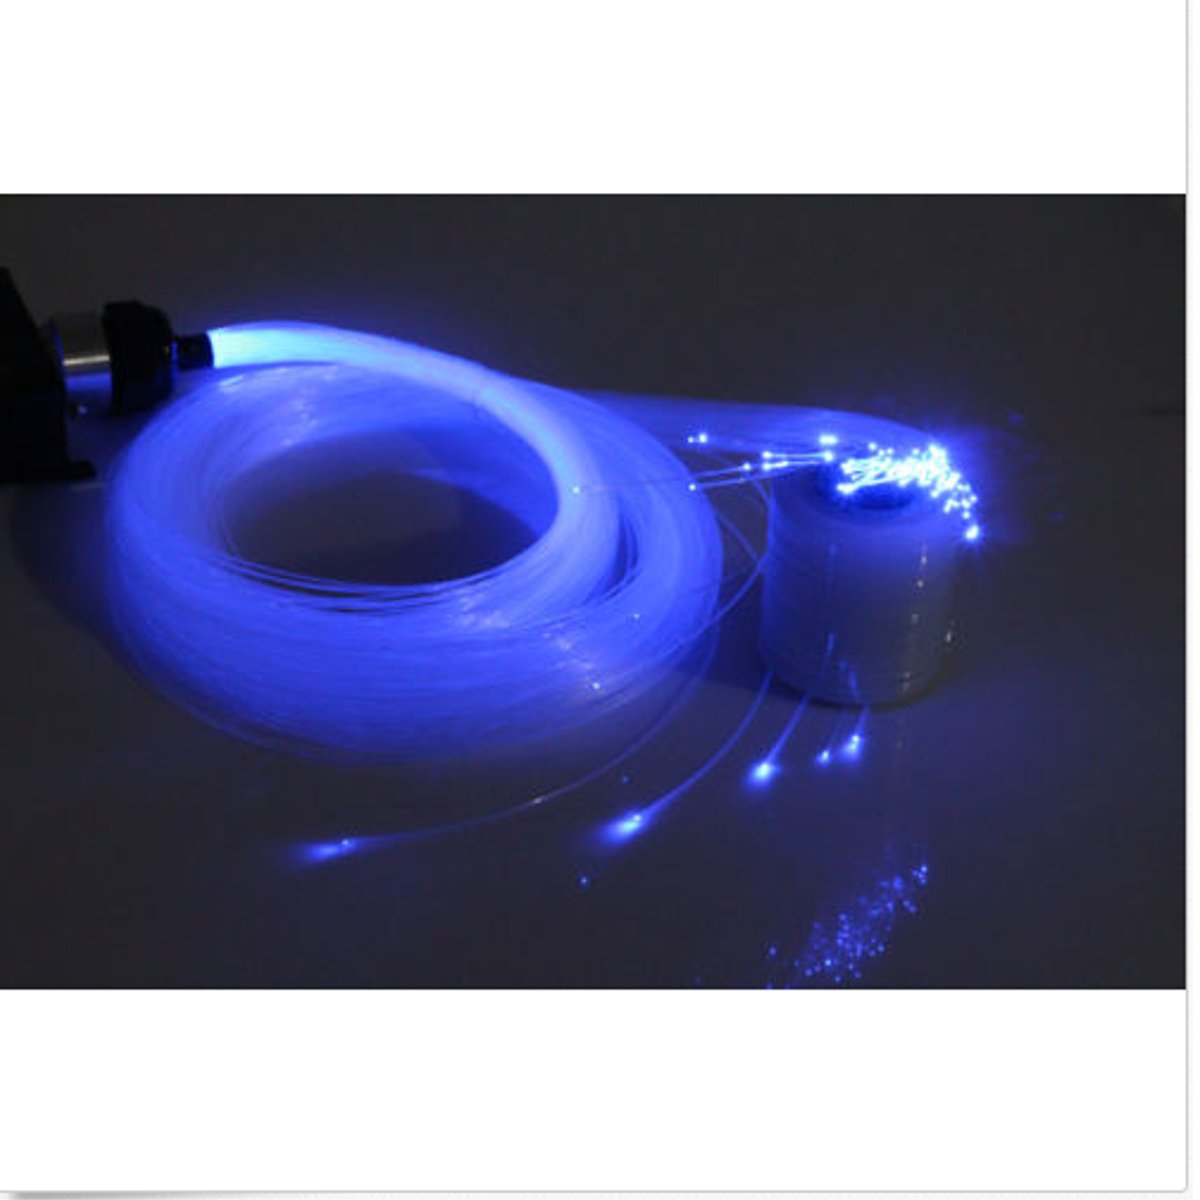 Find 0 75mm 300m/Roll PMMA Plastic End Glow Fiber Optic Cable For Star Sky Ceiling LED Light for Sale on Gipsybee.com with cryptocurrencies